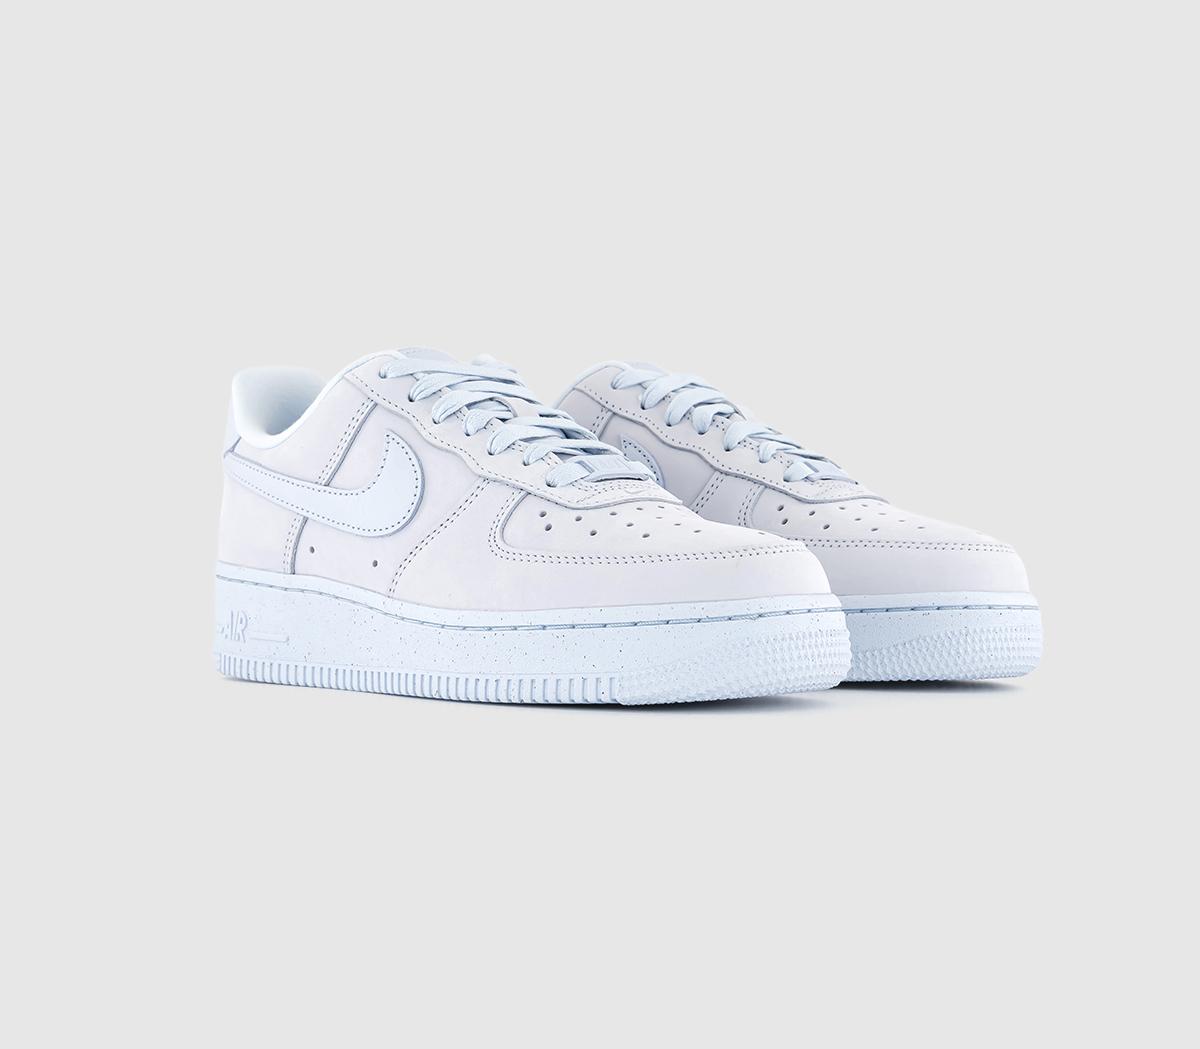 Nike Air Force 1 ’07 Prm Trainers Blue Tint, 8